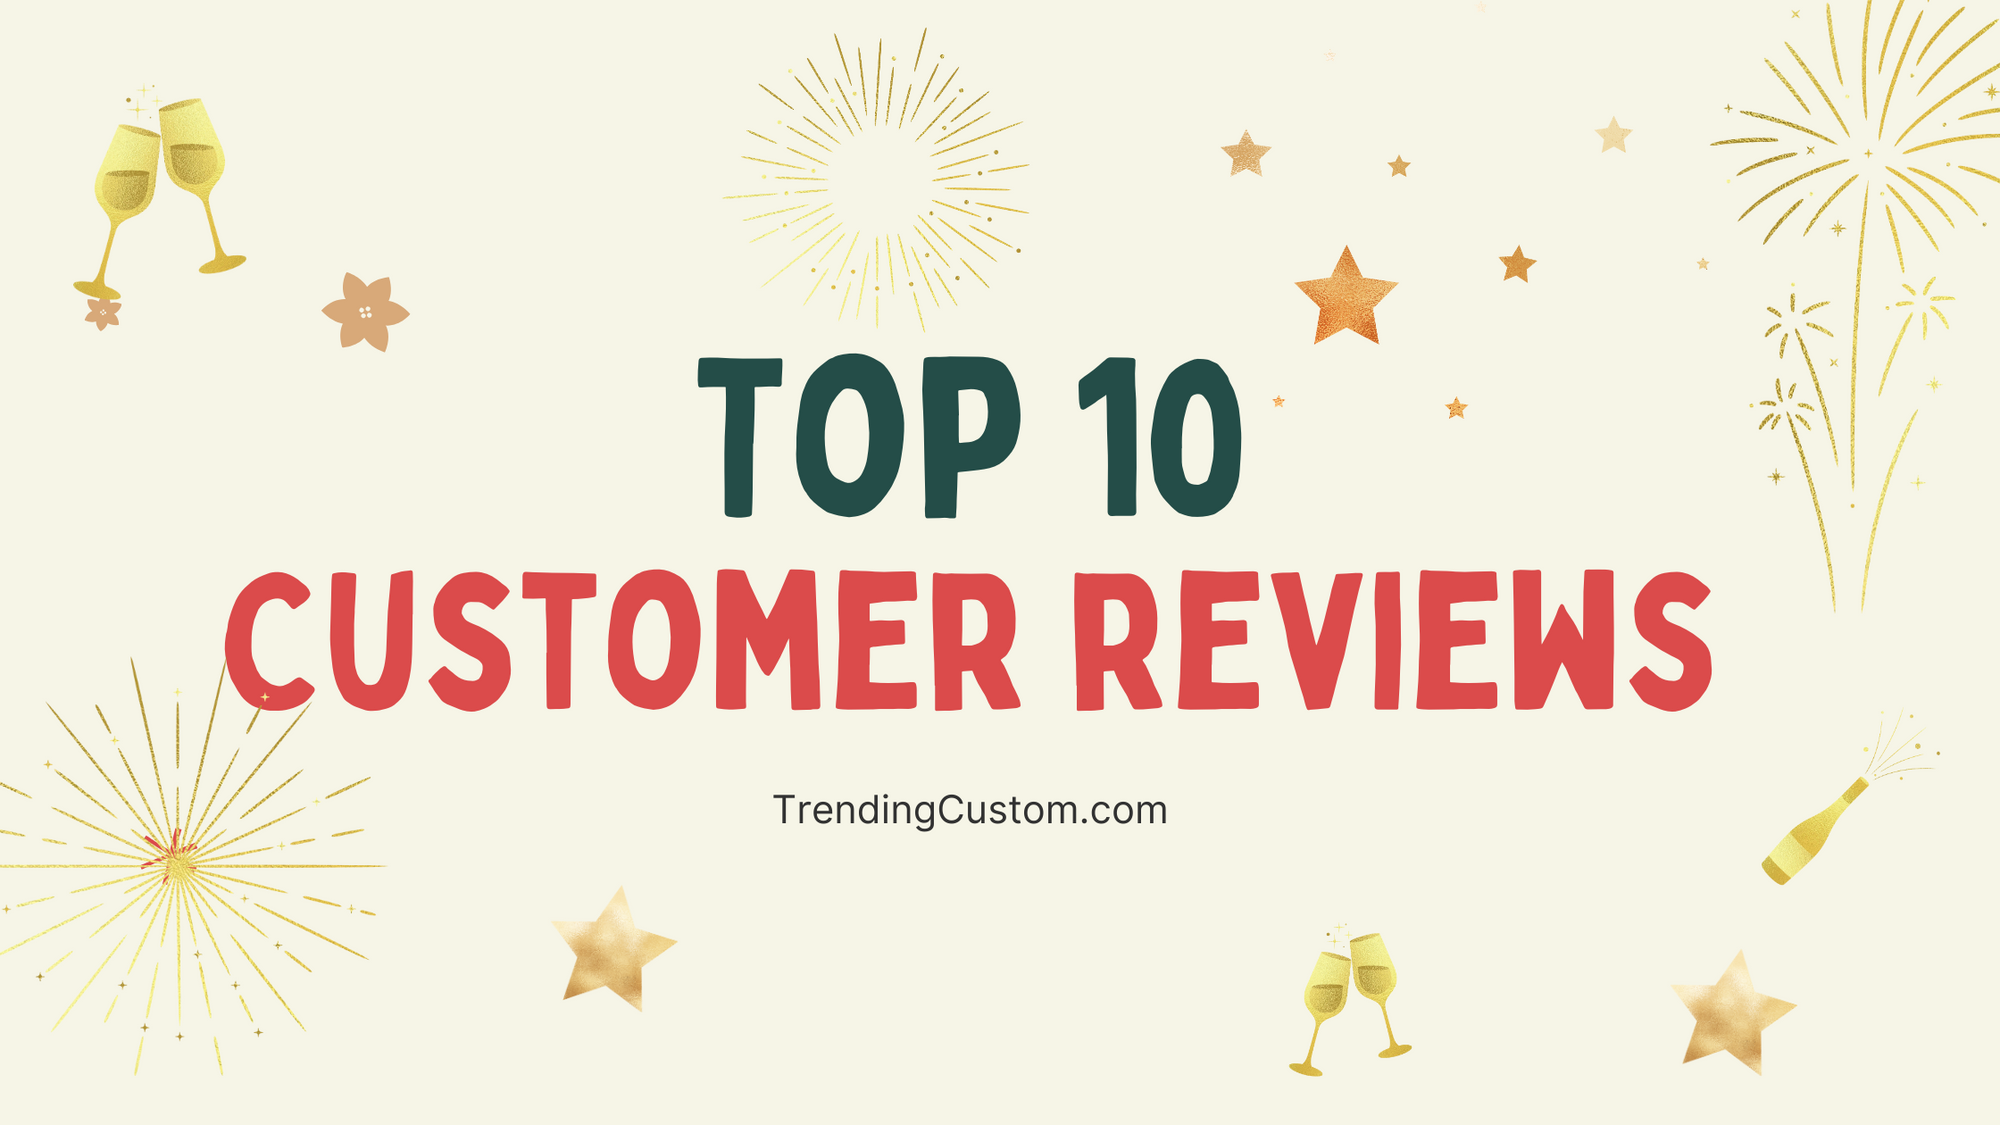 Top 10 Raving Reviews: Our Customers Speak Out! - January 7th